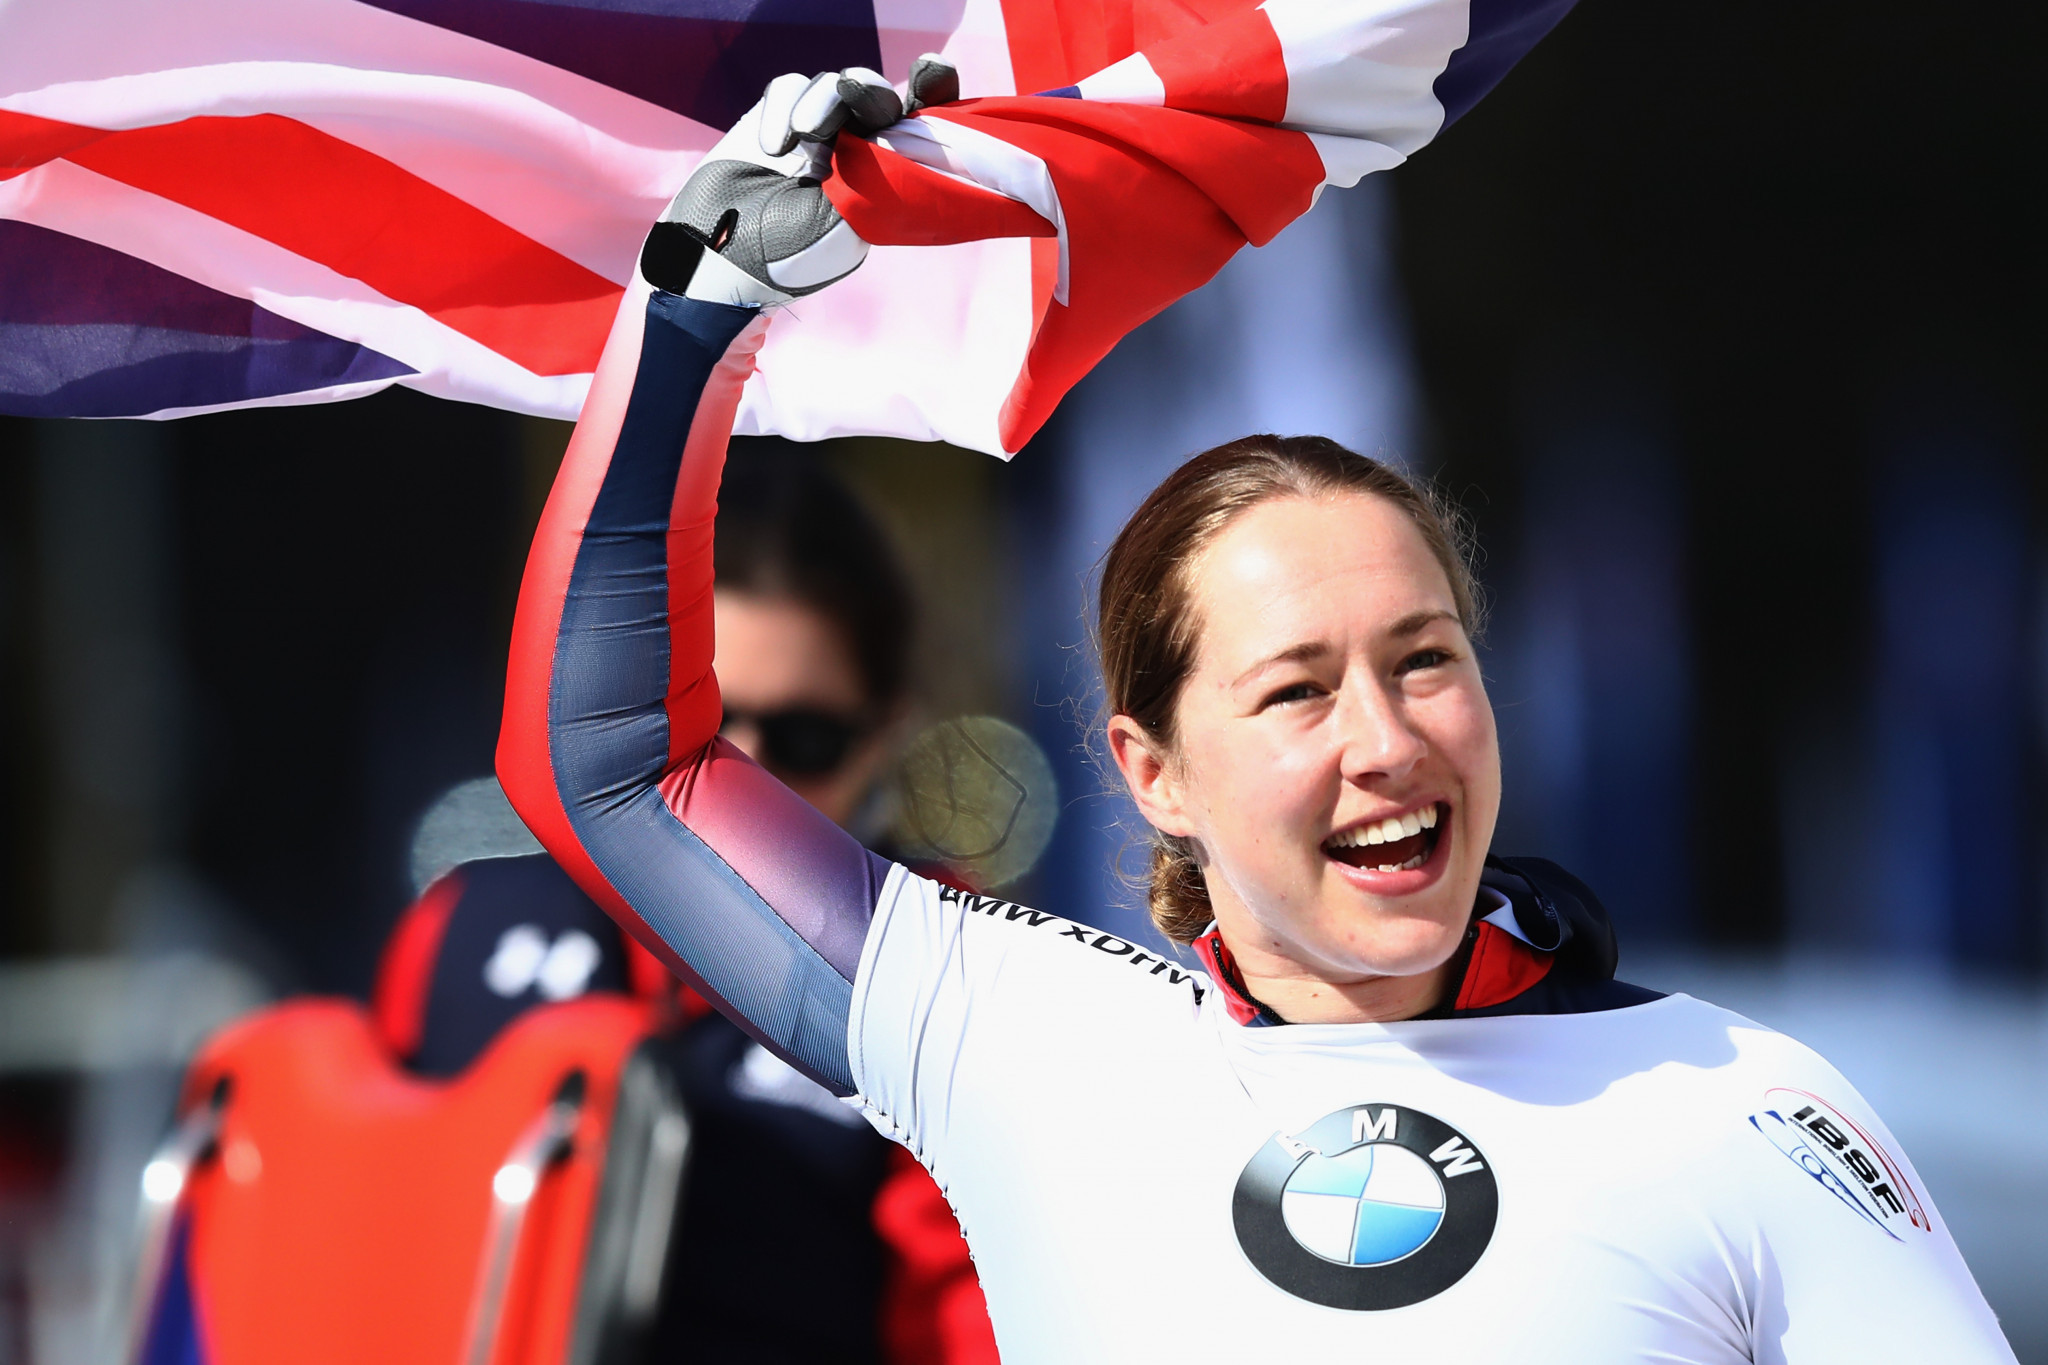 Britain's Olympic skeleton champion Lizzy Yarnold is among athletes to sign up to the #MyMoment campaign ©Getty Images